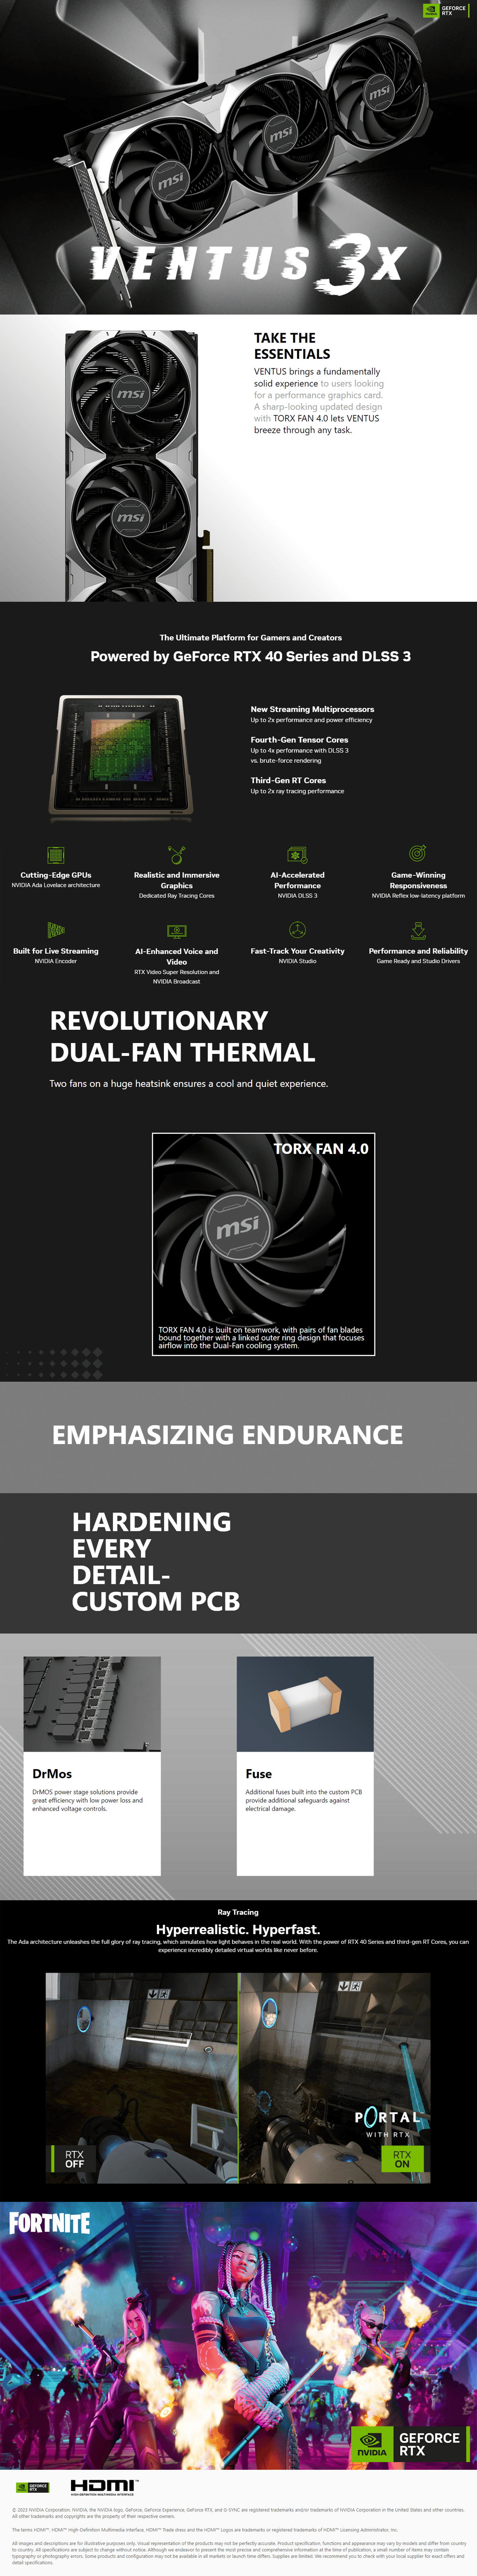 A large marketing image providing additional information about the product MSI GeForce RTX 4070 Ventus 3X E OC 12GB GDDR6 - Additional alt info not provided